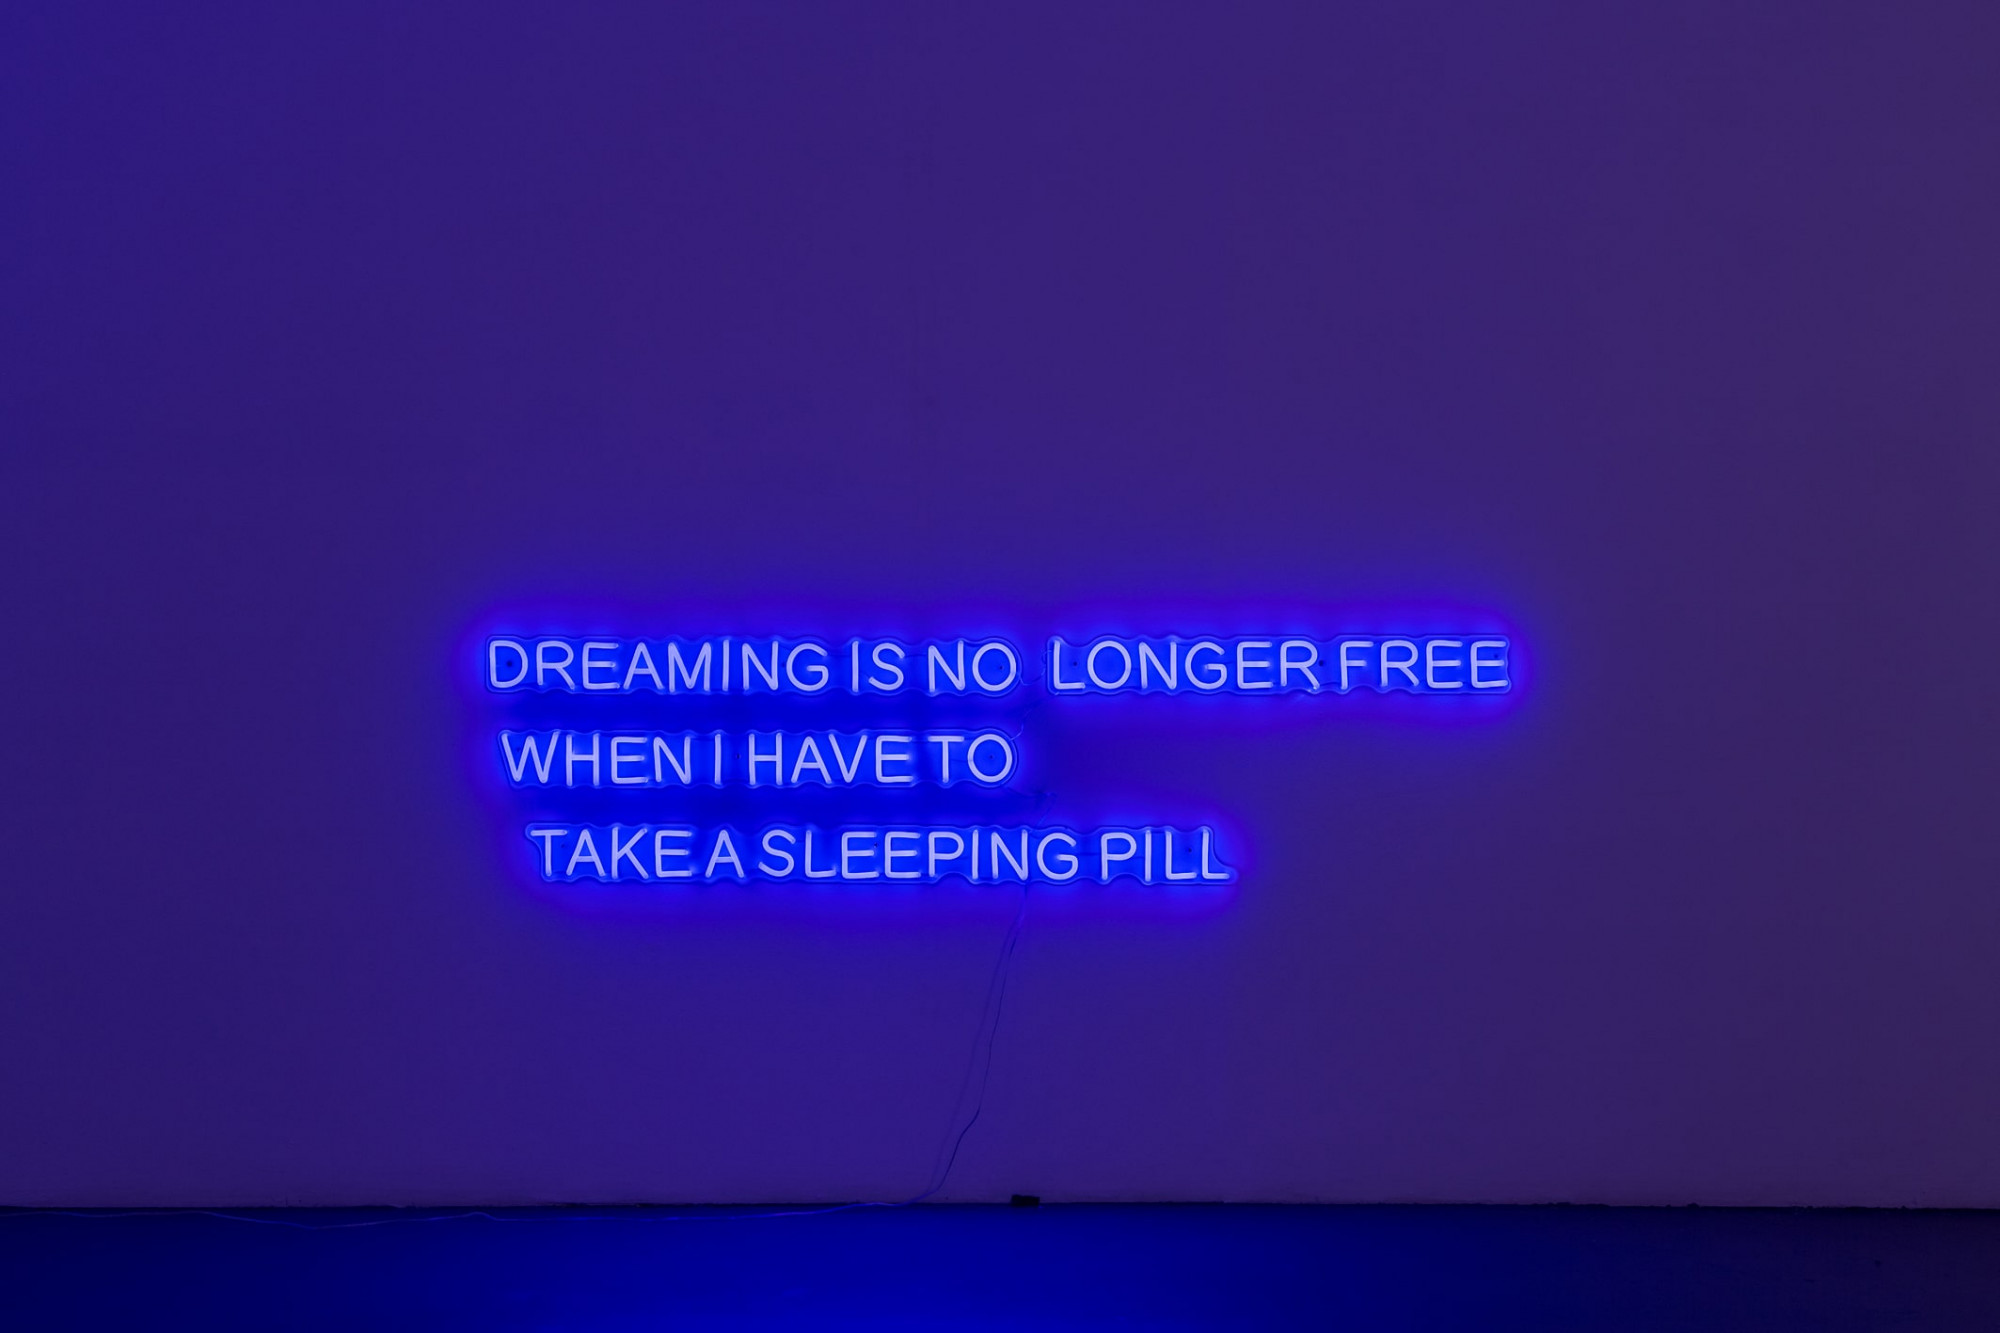 Chunxiao Qu, <em>DREAMING IS NO LONGER FREE WHEN I HAVE TO TAKE A SLEEPING PILL</em>, 2021, led neon with transparent acrylic frames, 176.74 x 30.7 cm, edition of 5. Photo: Christo Crocker